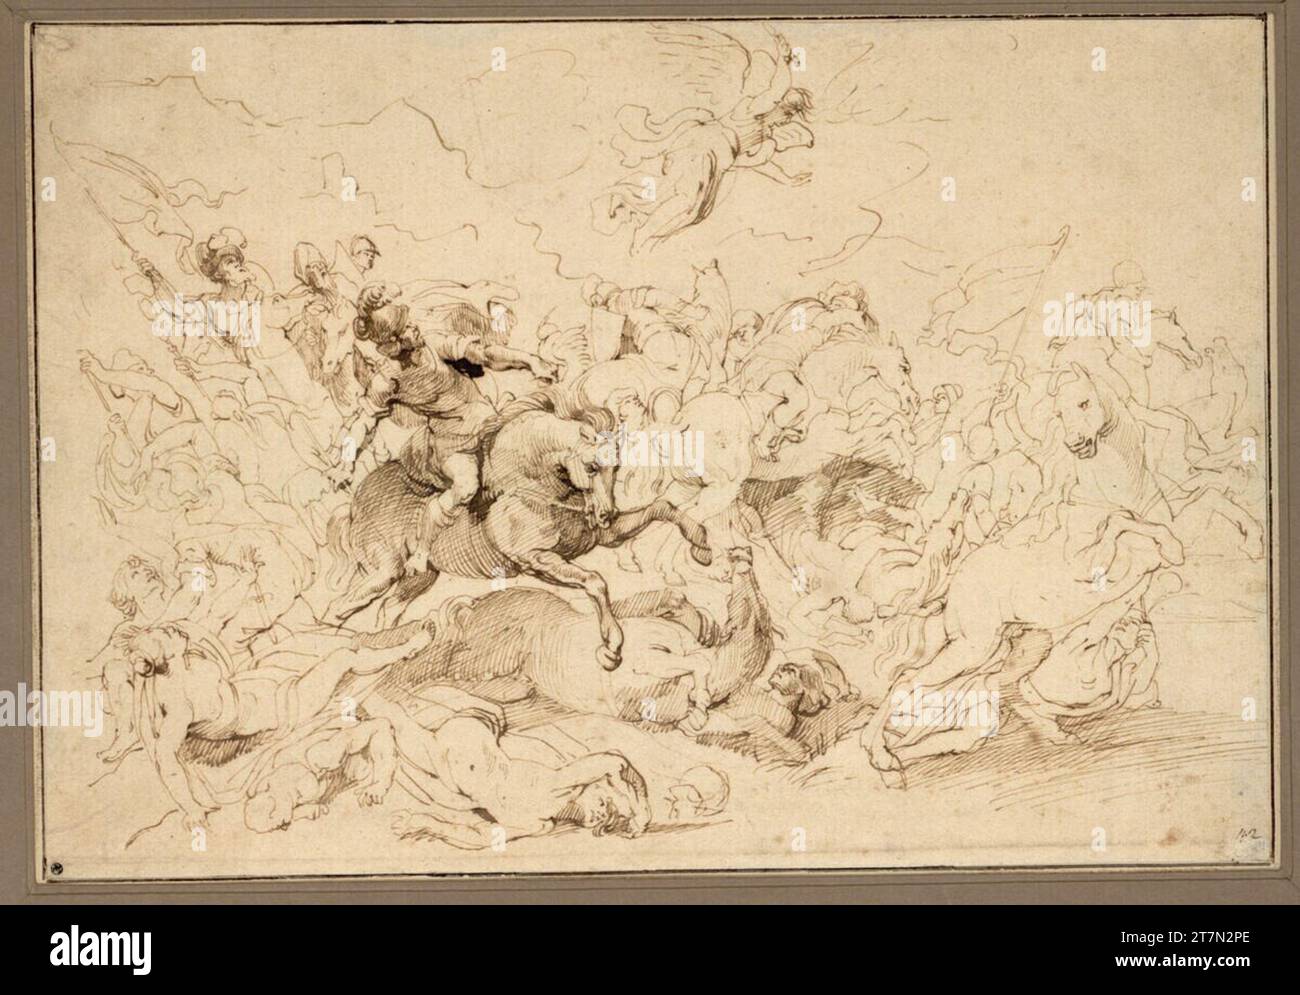 Peter Paul Rubens The defeat of the Sanherib. Feder in brown around oder kurz after 1615/16 Stock Photo